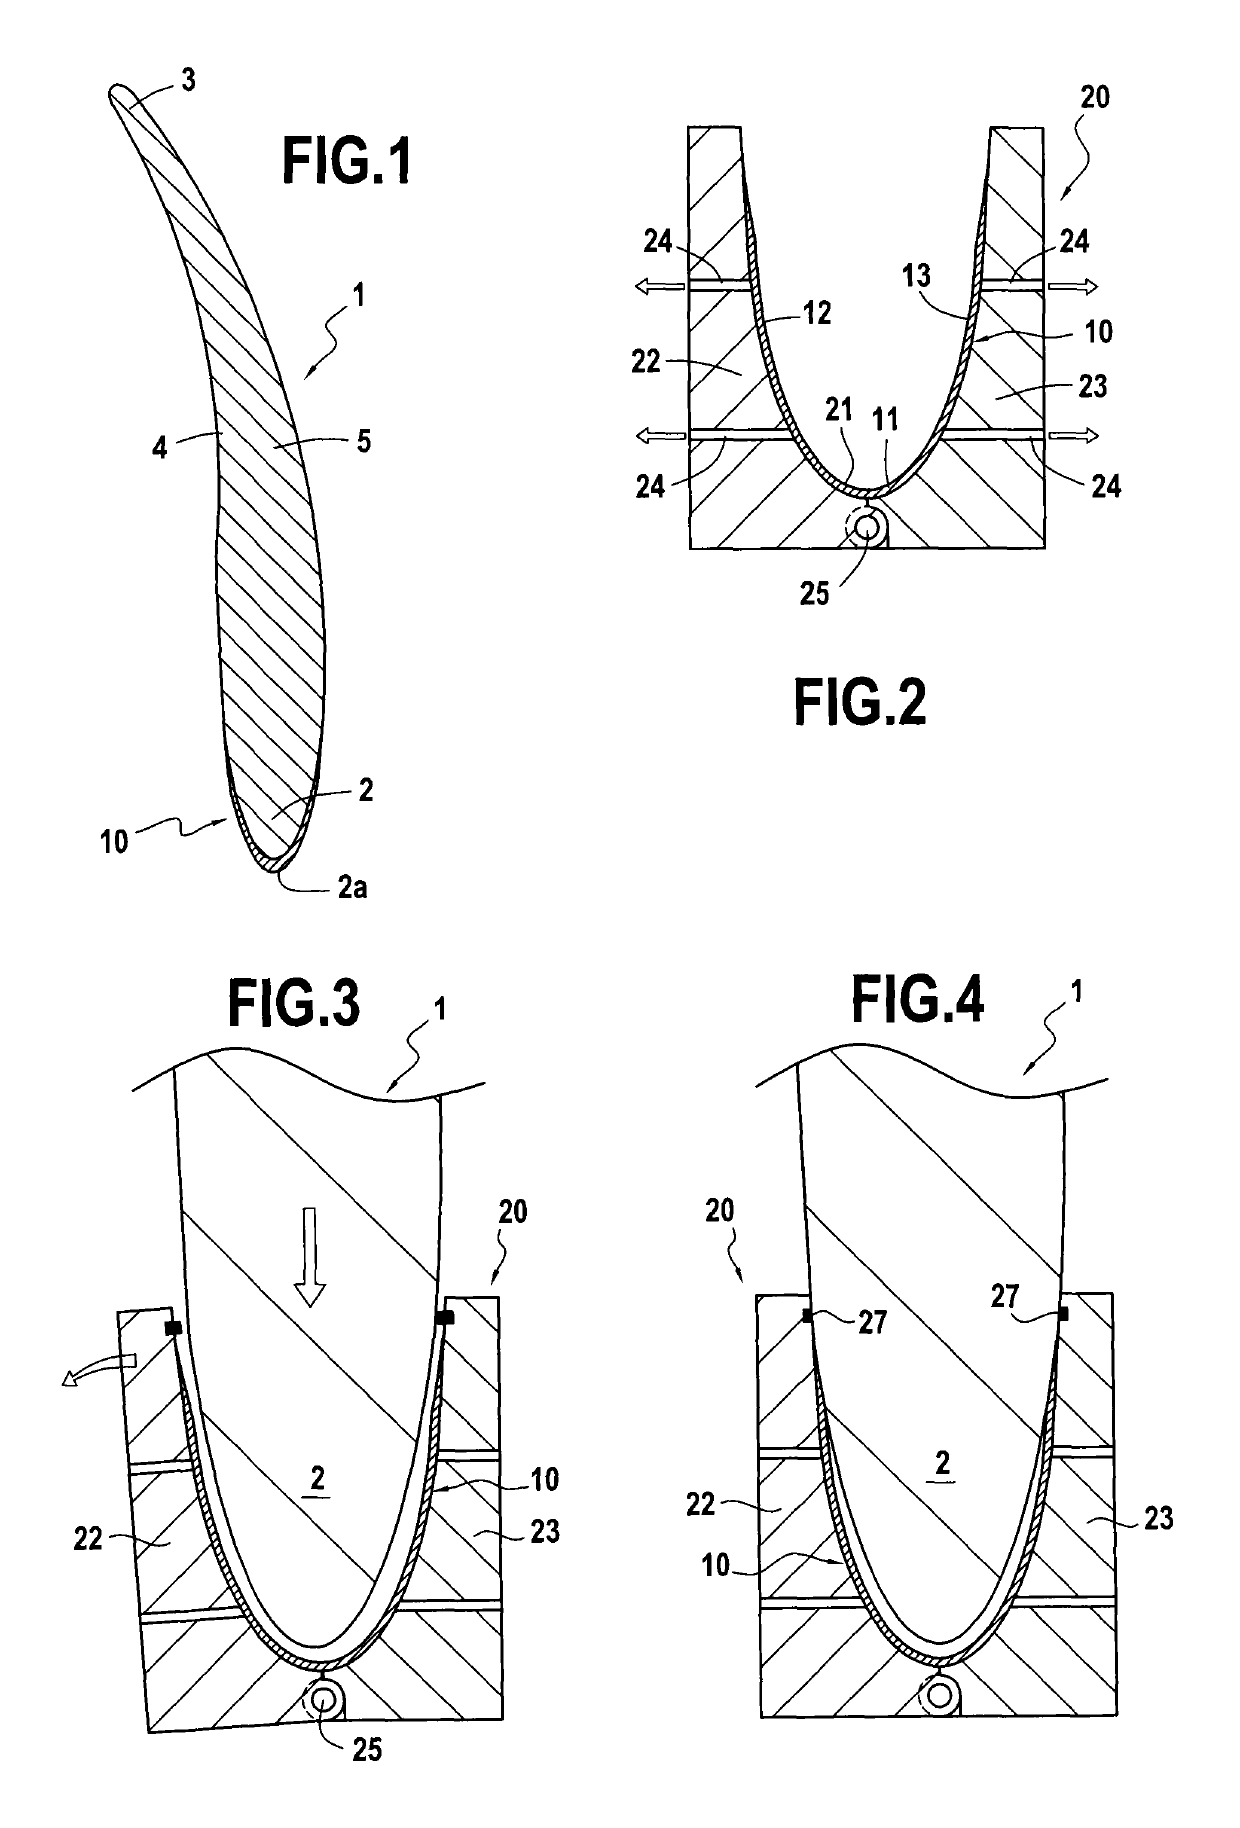 Method of fastening structural metal reinforcement on a portion of a gas turbine blade made of composite material, and an injection mold for performing such a method